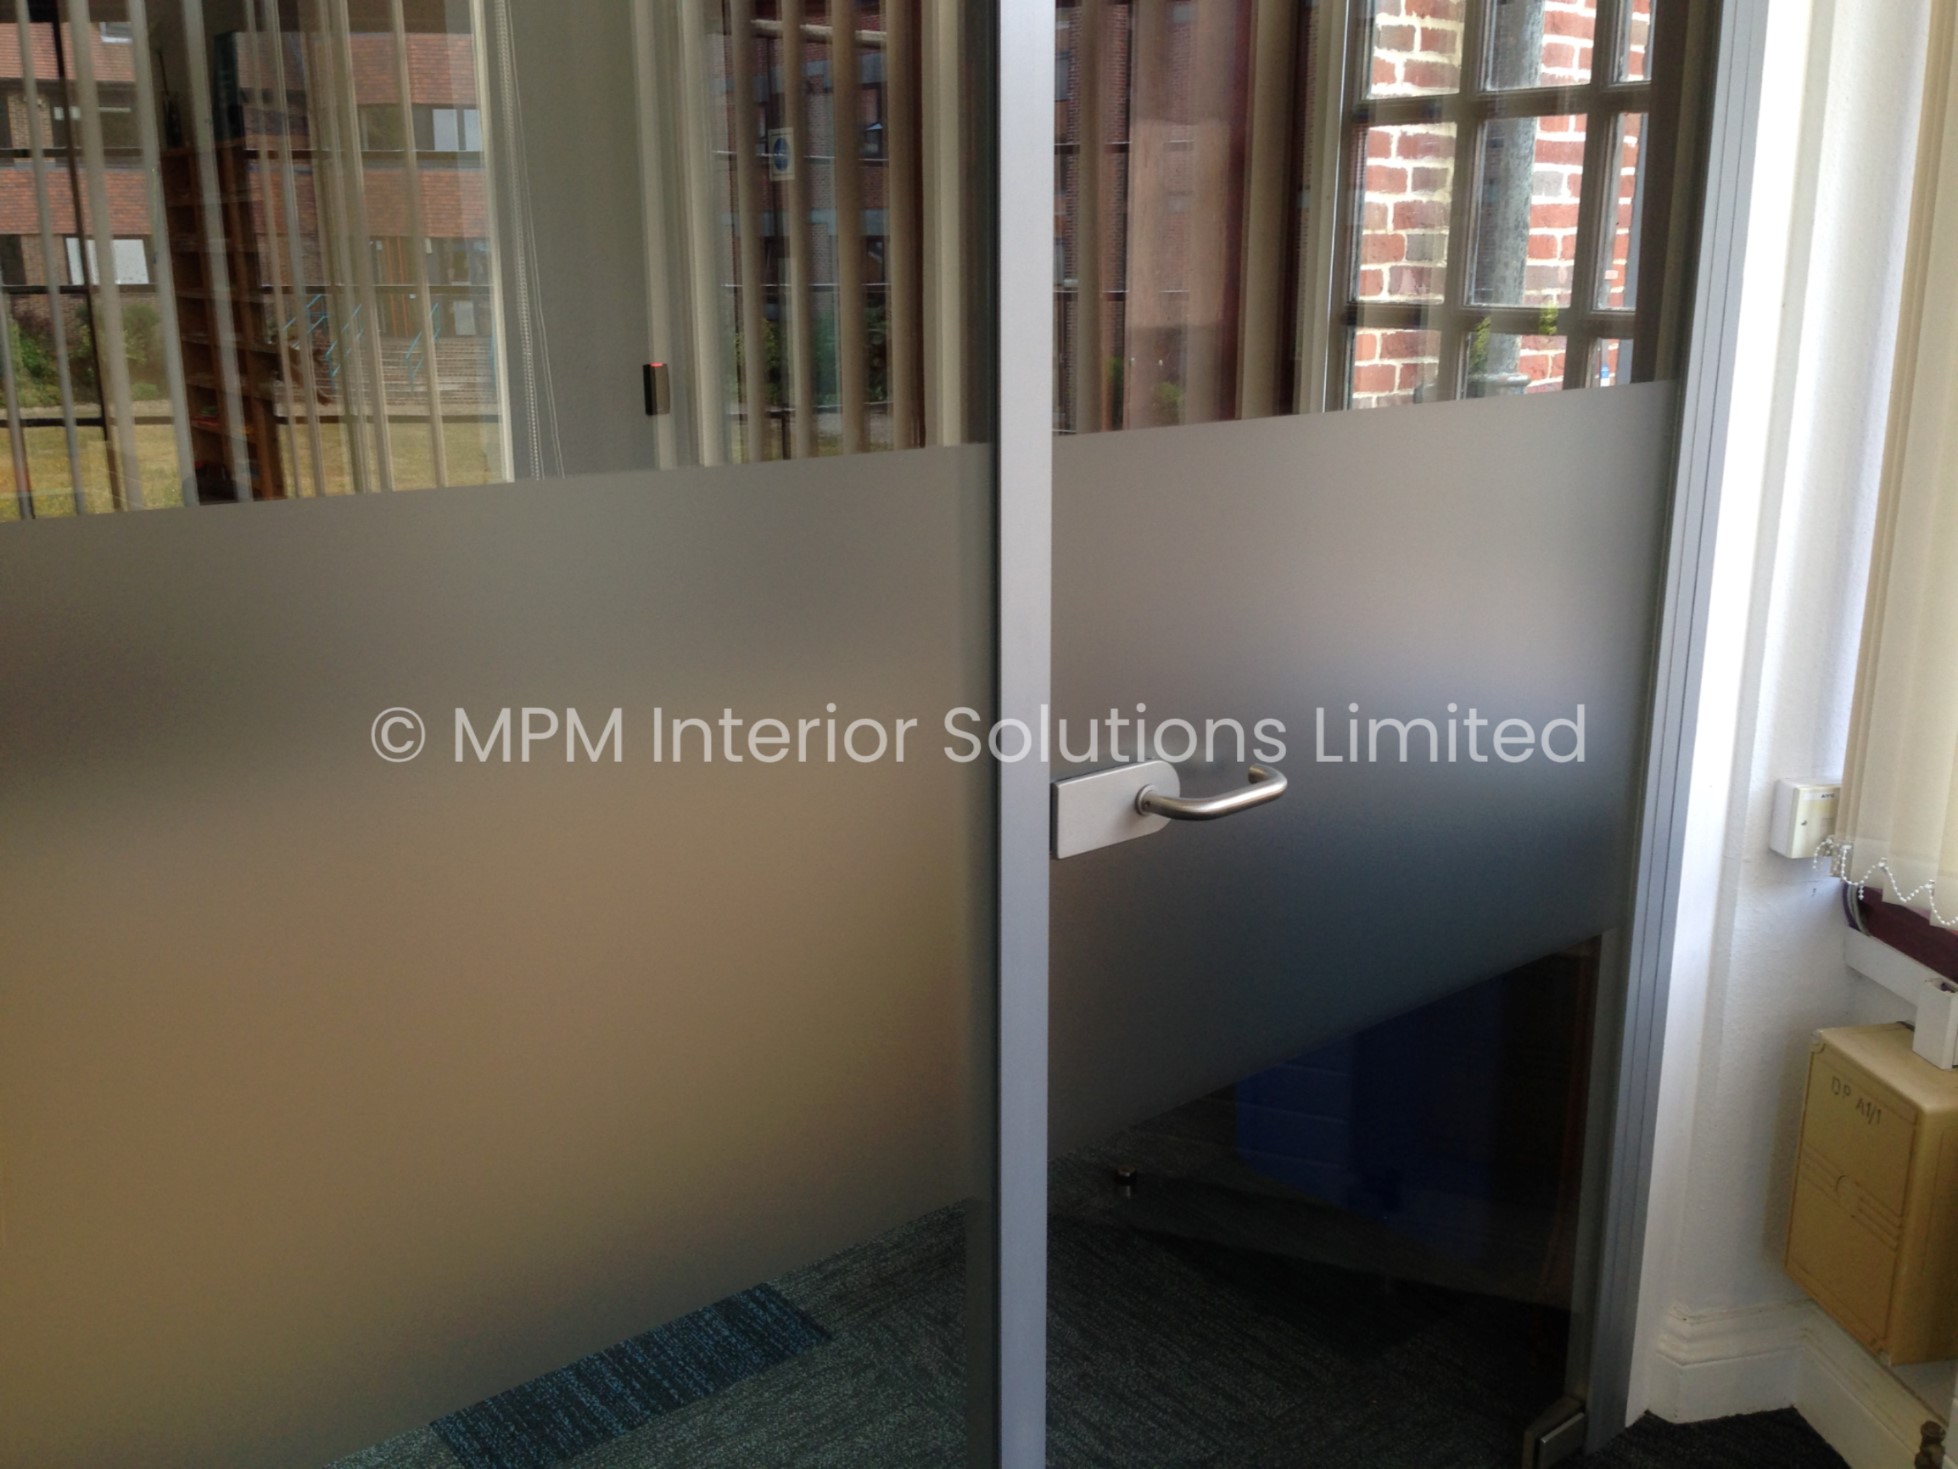 Frameless Glass Office Partitioning, New Forest District Council (Lyndhurst, Hampshire), MPM Interior Solutions Limited